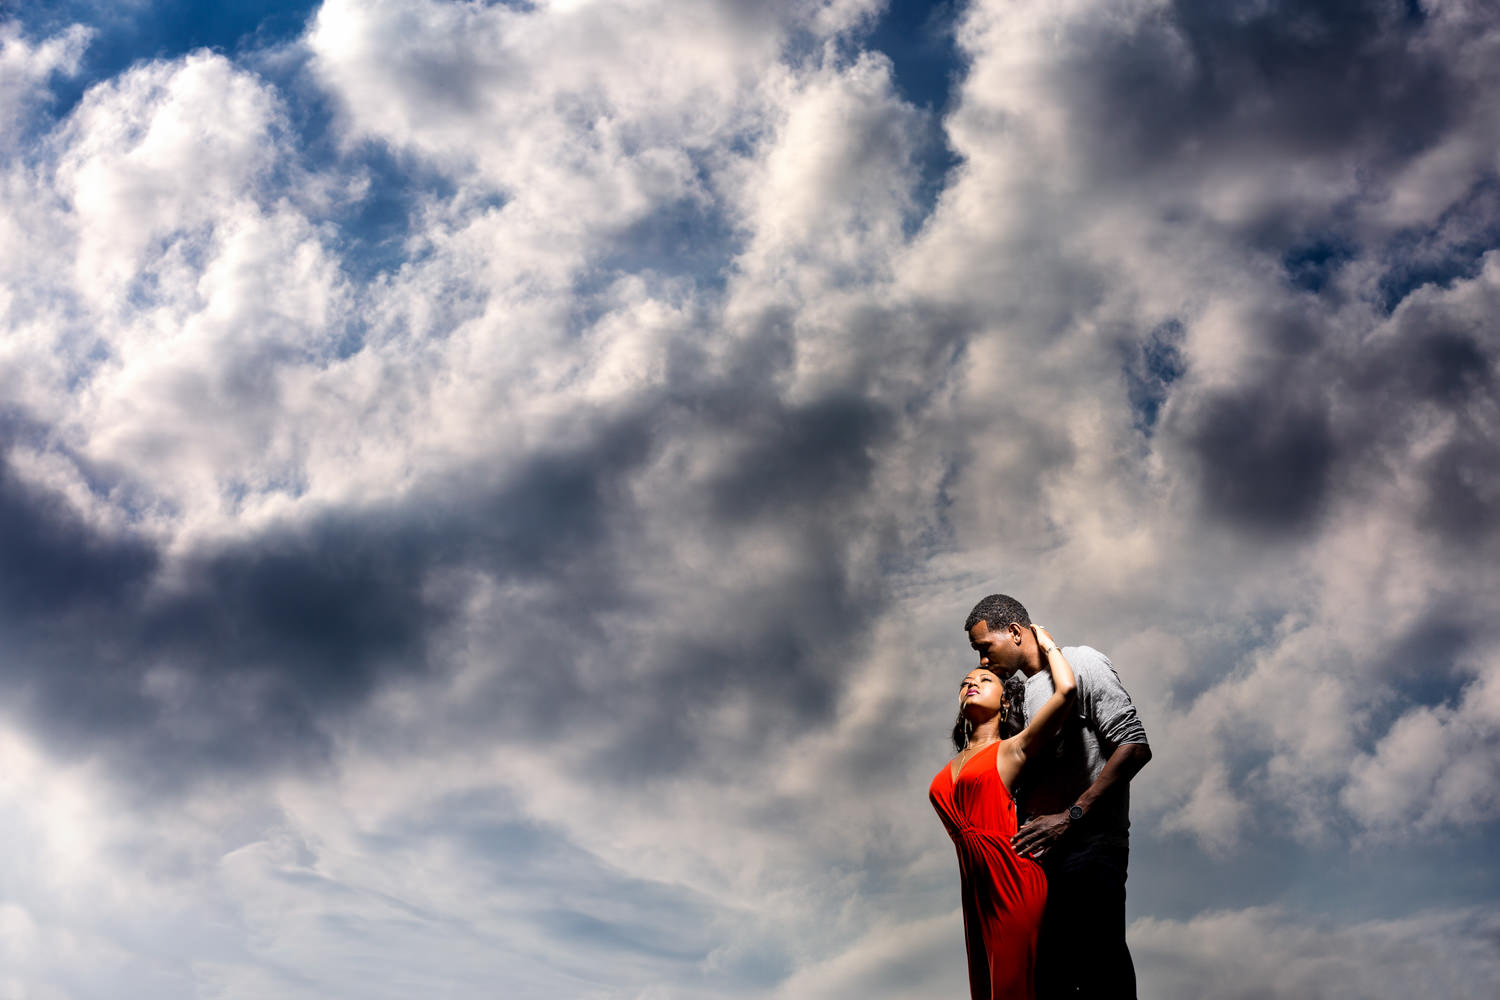 This was an engagement session in Baltimore Maryland near Federal Hill, just behind the American Visionary Art Museum, The clouds were doing some magnificent swirls with the wind blowing hard, I had the couple quickly climb a hill and we did this dramatic shot at the beginning of their session, This black couple is embracing at the top of a hill with angry cumulus clouds behind them, The gal is in a bright red dress, The guy is much taller than she is and she looks up toward him, Procopio Photography, best top Washington DC photographer, best top Maryland photographer, best top Virginia photographer, best top DMV photographer, best top wedding photographer, best top commercial photographer, best top portrait photographer, best top boudoir photographer, modern fine art portraits, dramatic, unique, different, bold, editorial, photojournalism, award winning photographer, published photographer, memorable images, be different, stand out, engagement photography